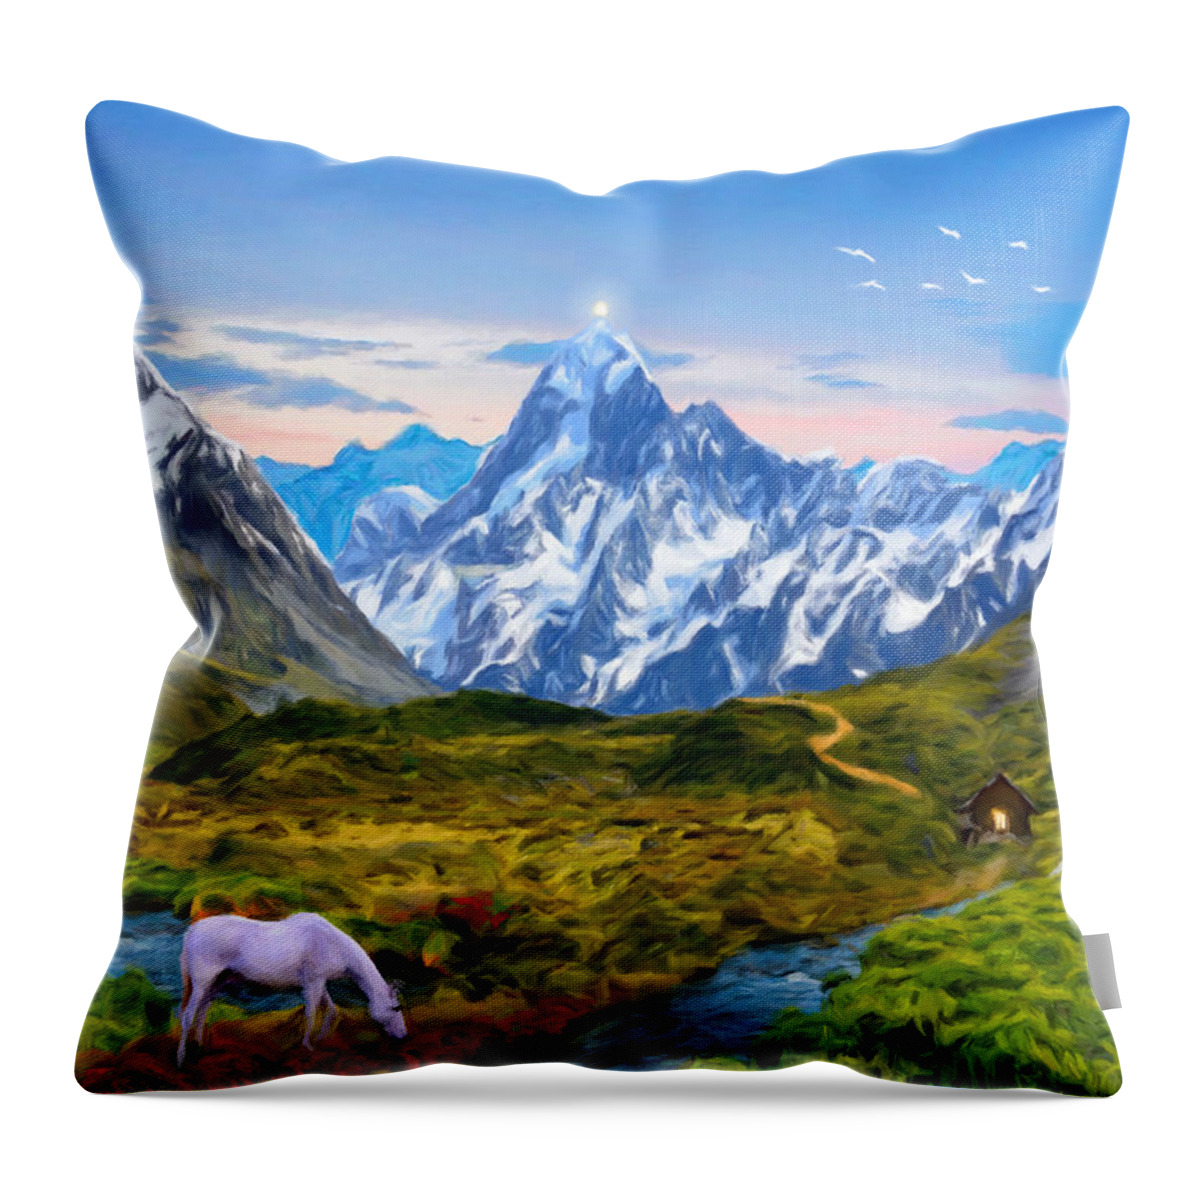  Landscape Throw Pillow featuring the painting The Journey Begins by Trask Ferrero